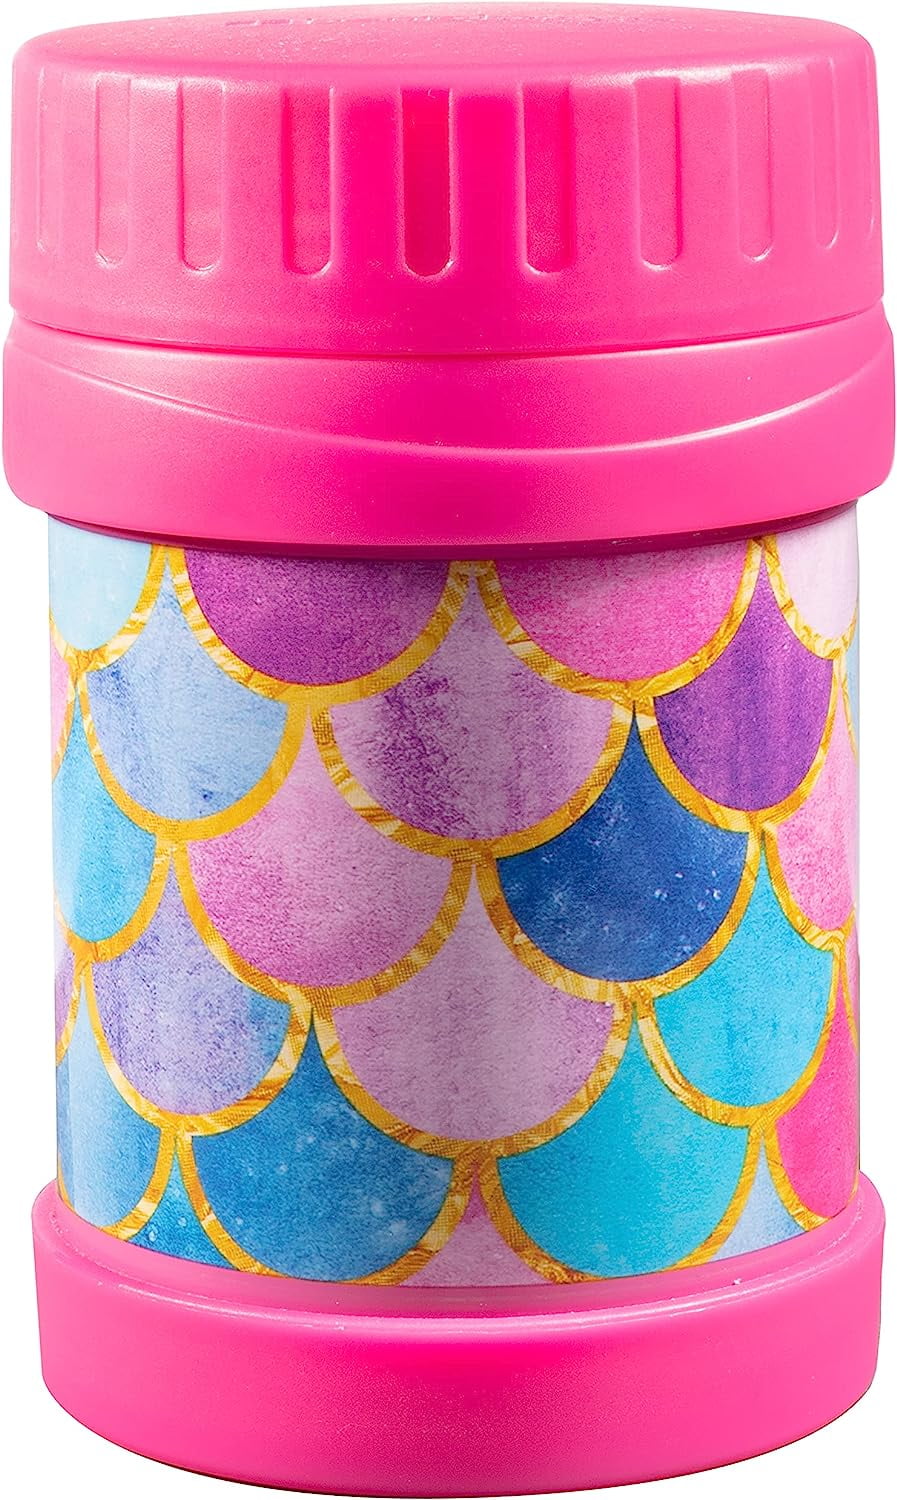 Bentology Stainless Steel Insulated 13oz Thermos for Kids - Mermaid - Large  Leak-Proof Lunch Storage Jar for Hot or Cold Food 